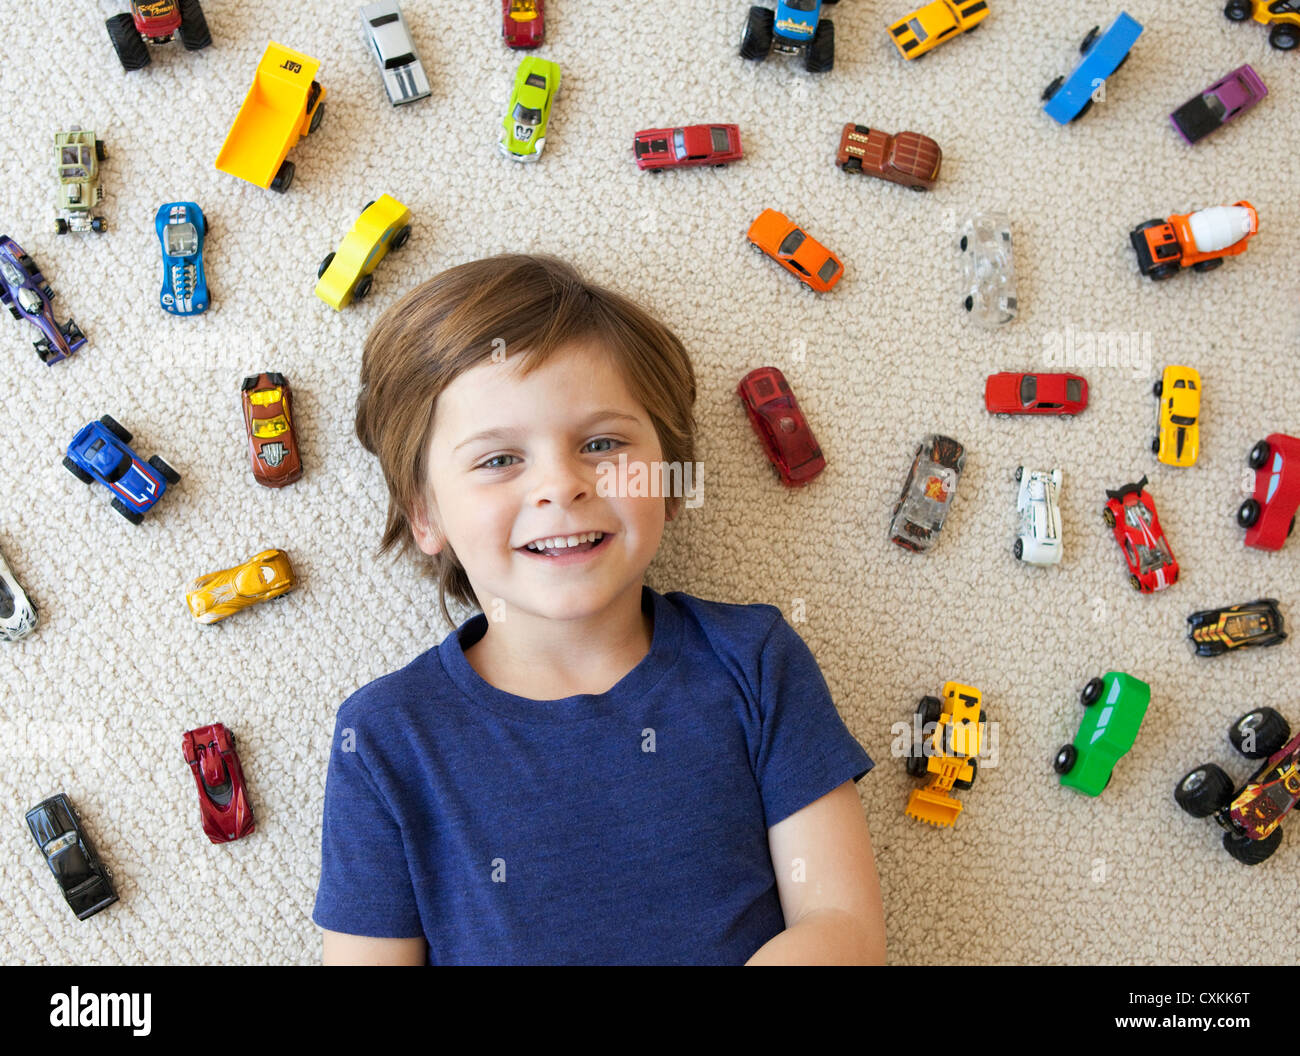 Young boy surrounded by toy cars Stock Photo